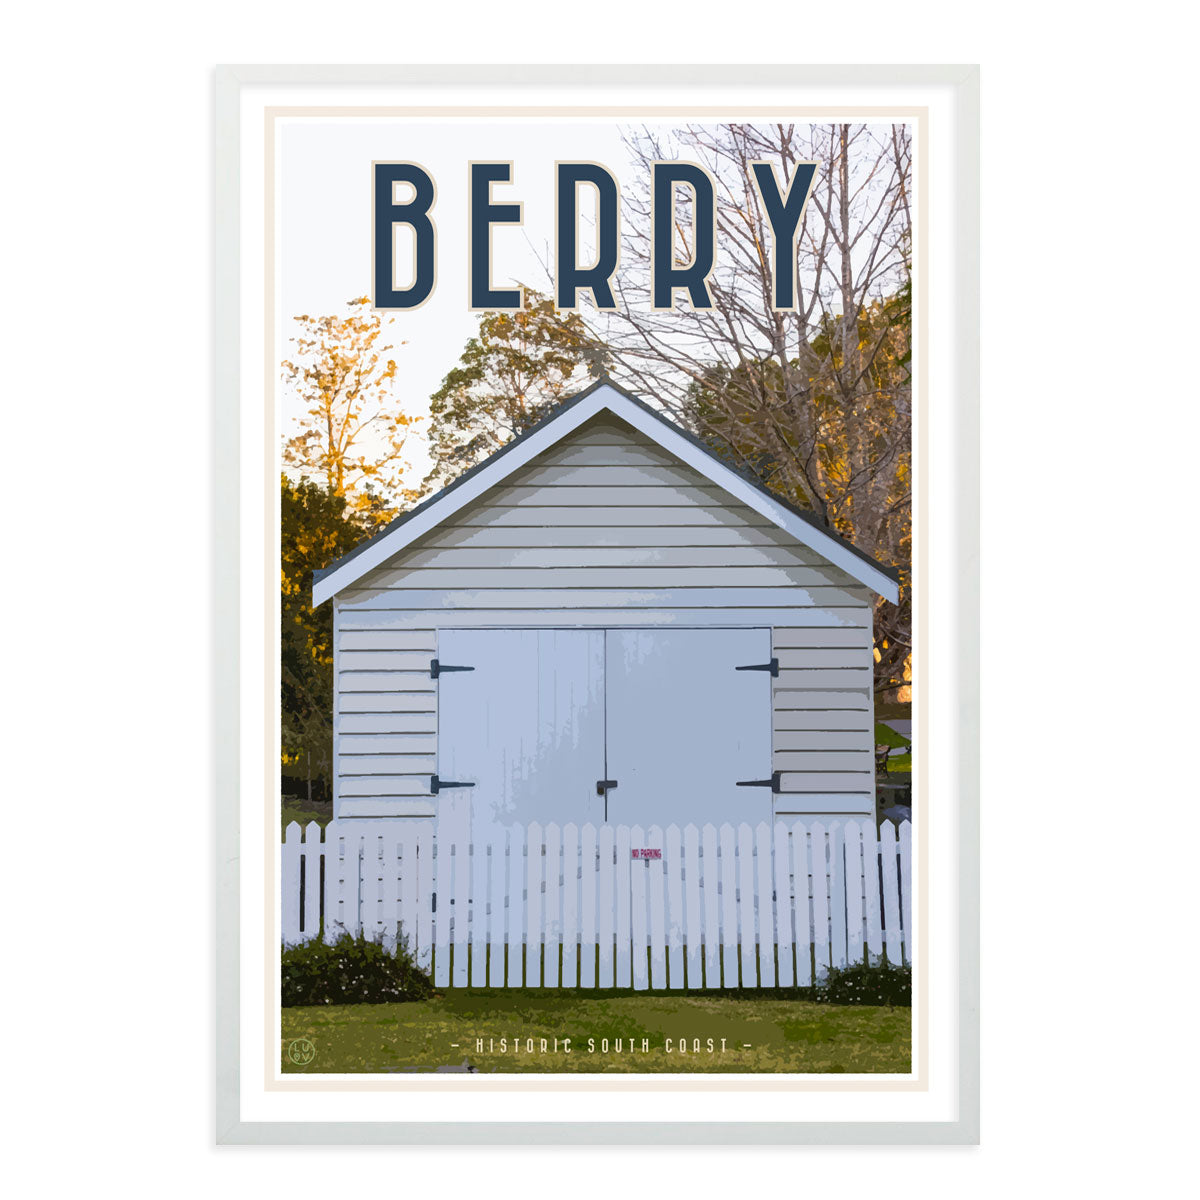 Berry south coast village travel style white framed print placesweluv